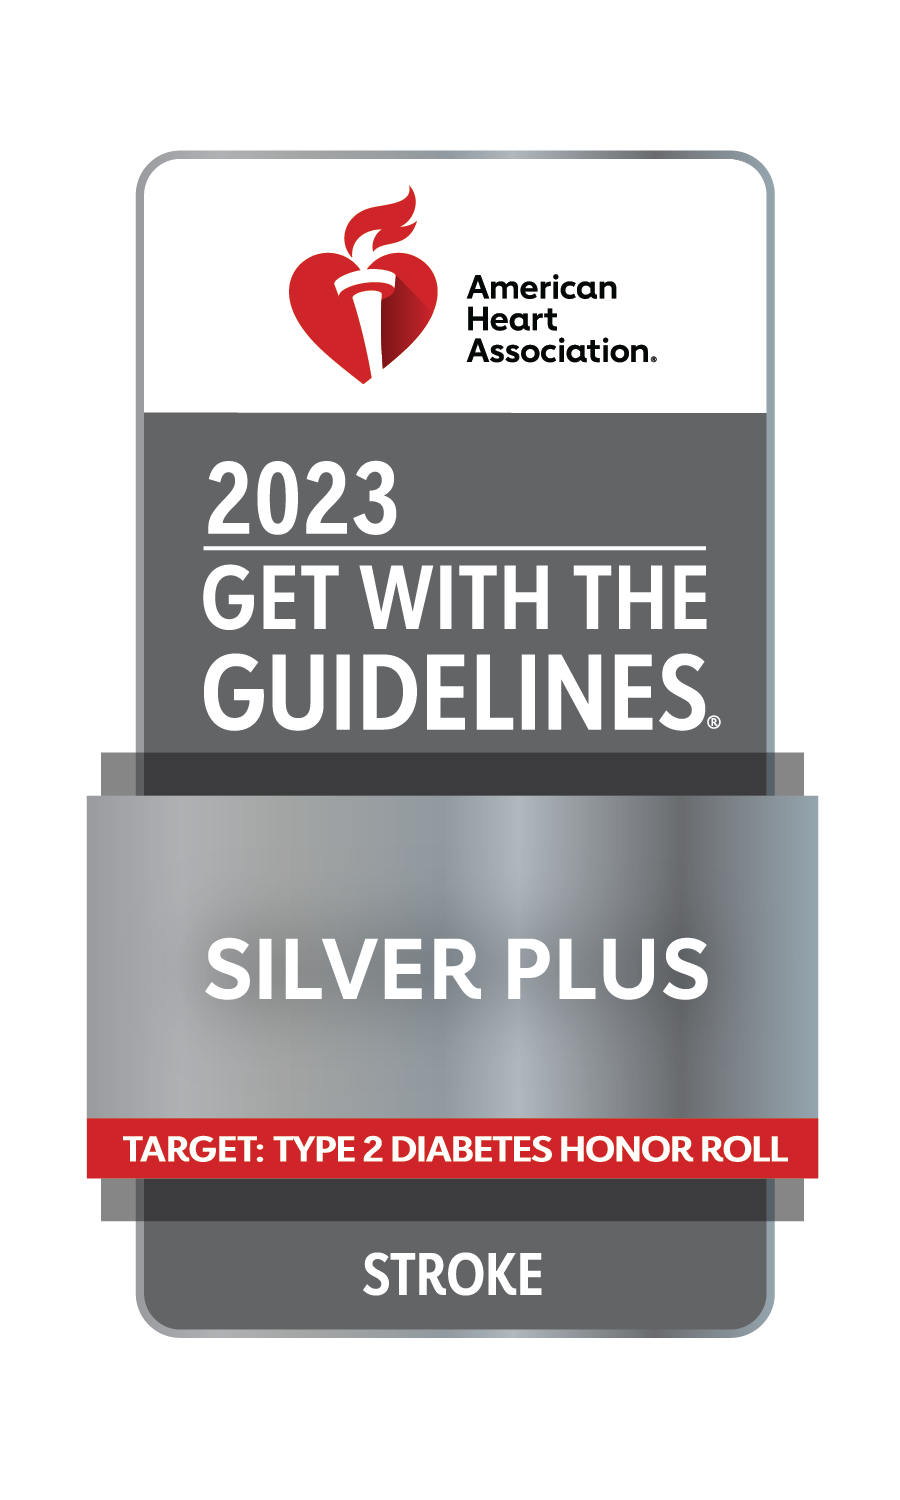 American Heart Association - Get with the Guidelines - Gold Plus - Stroke